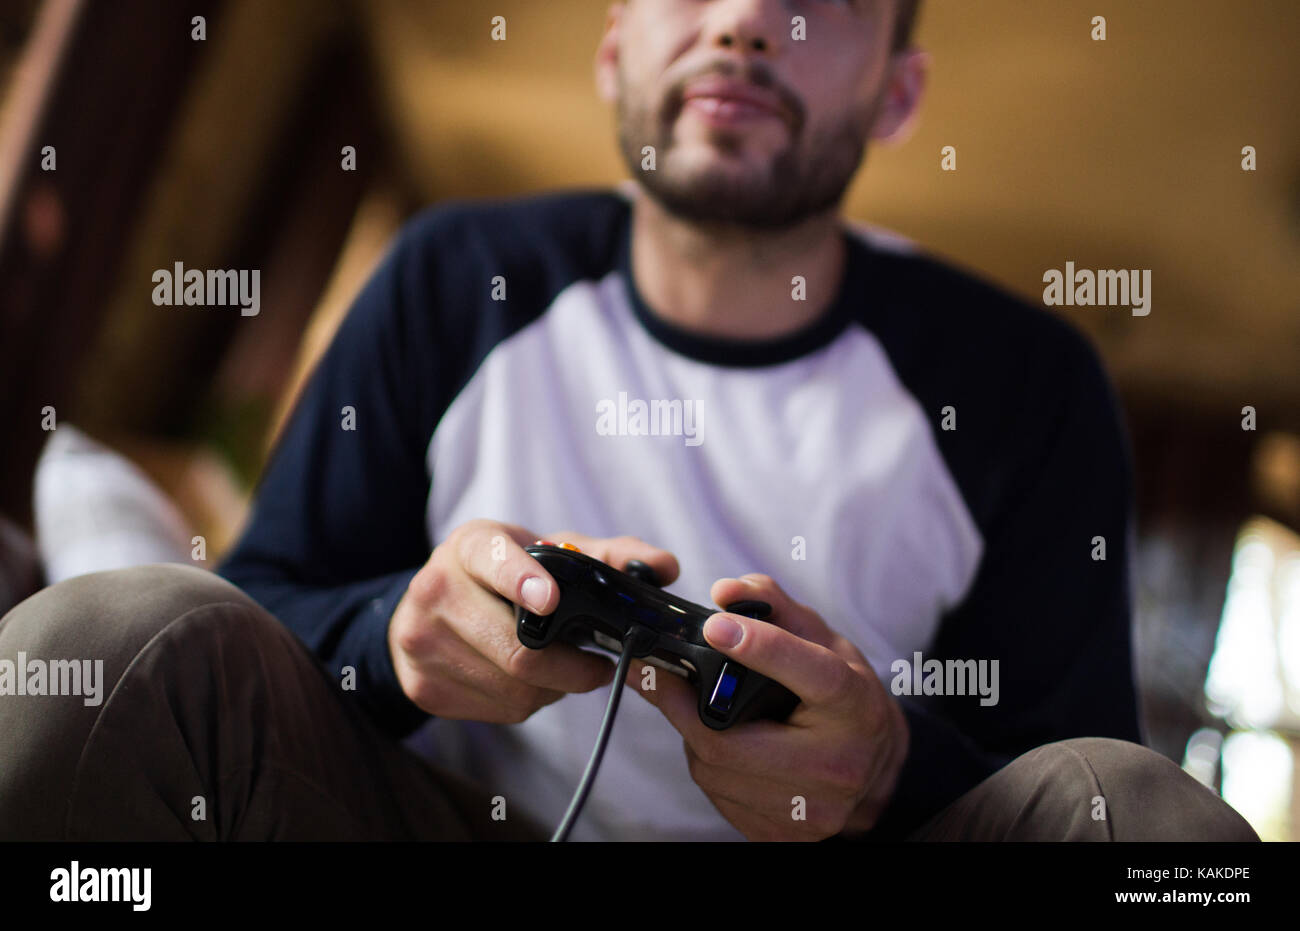 Young handsome man holding game controller playing video games. Stock Photo